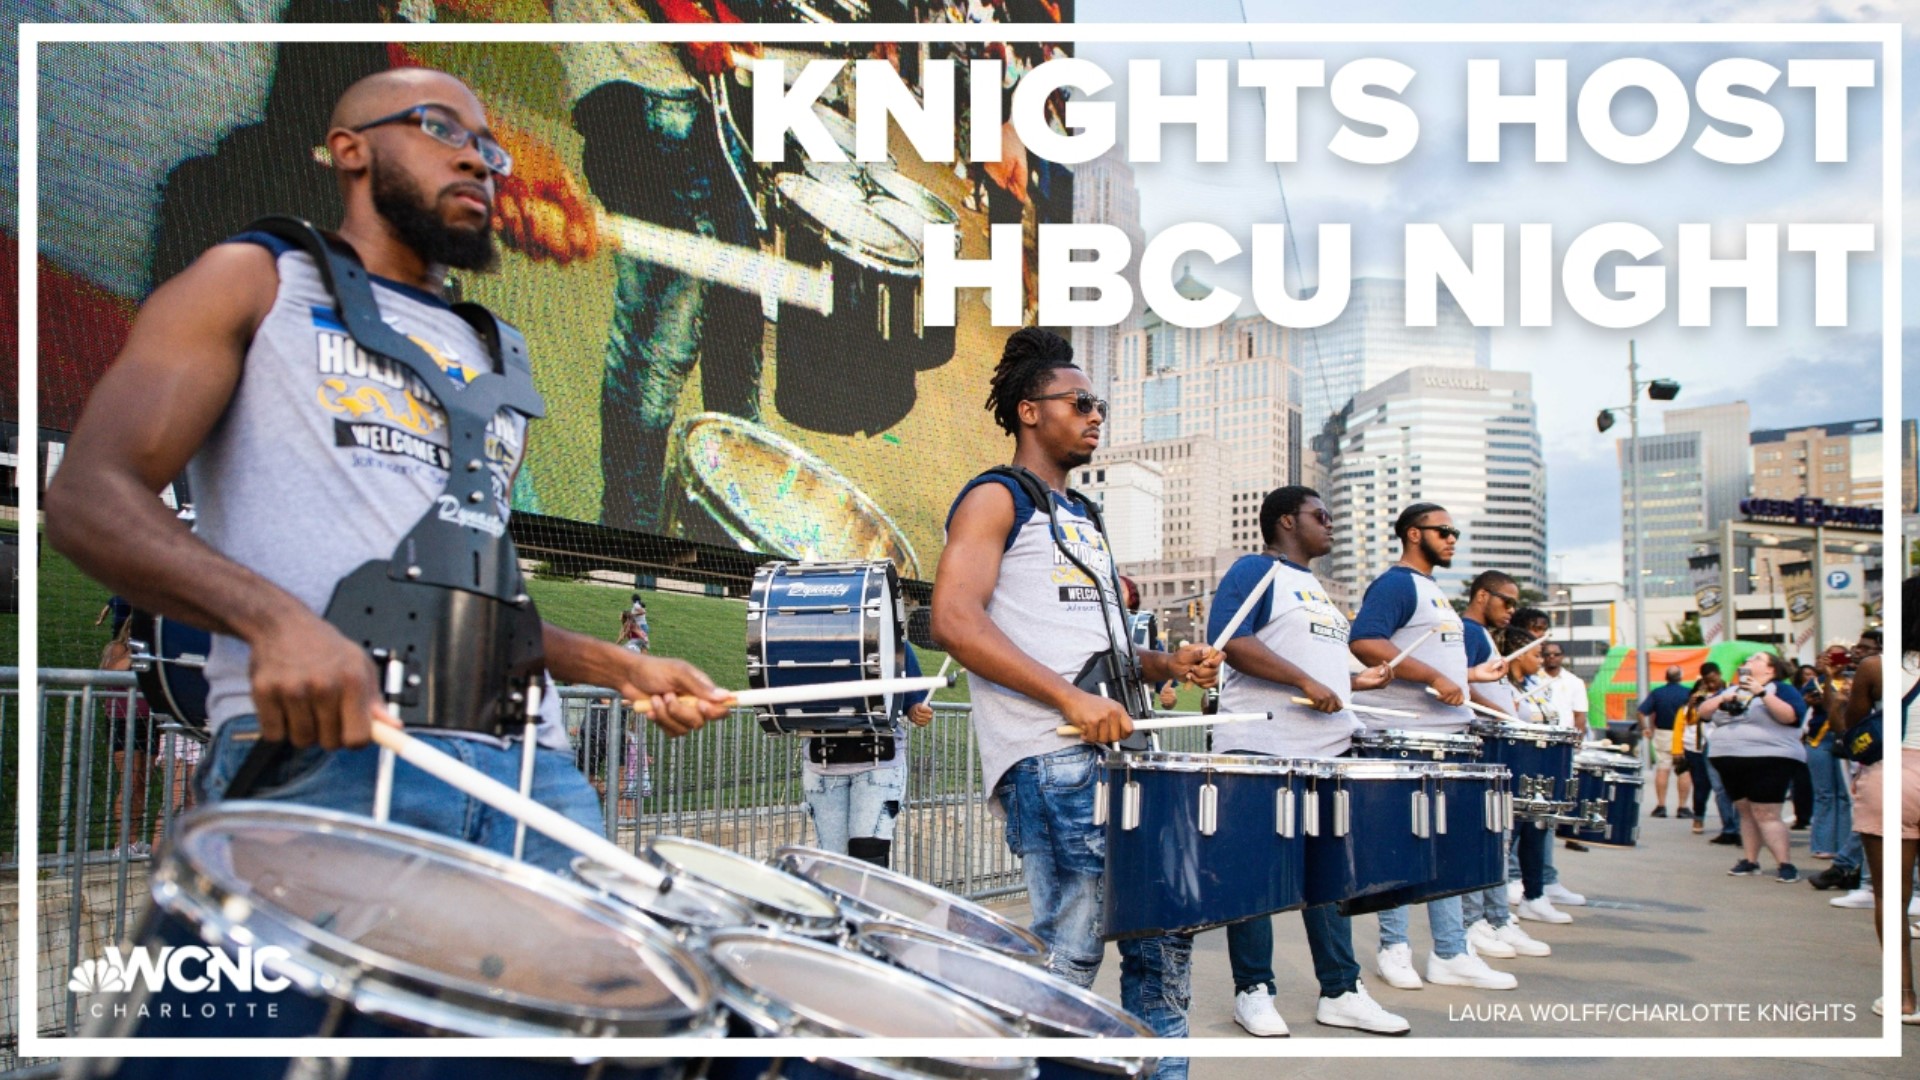 The inaugural event will take place Friday night, as the Knights host the Durham Bulls for a double-header in Uptown.